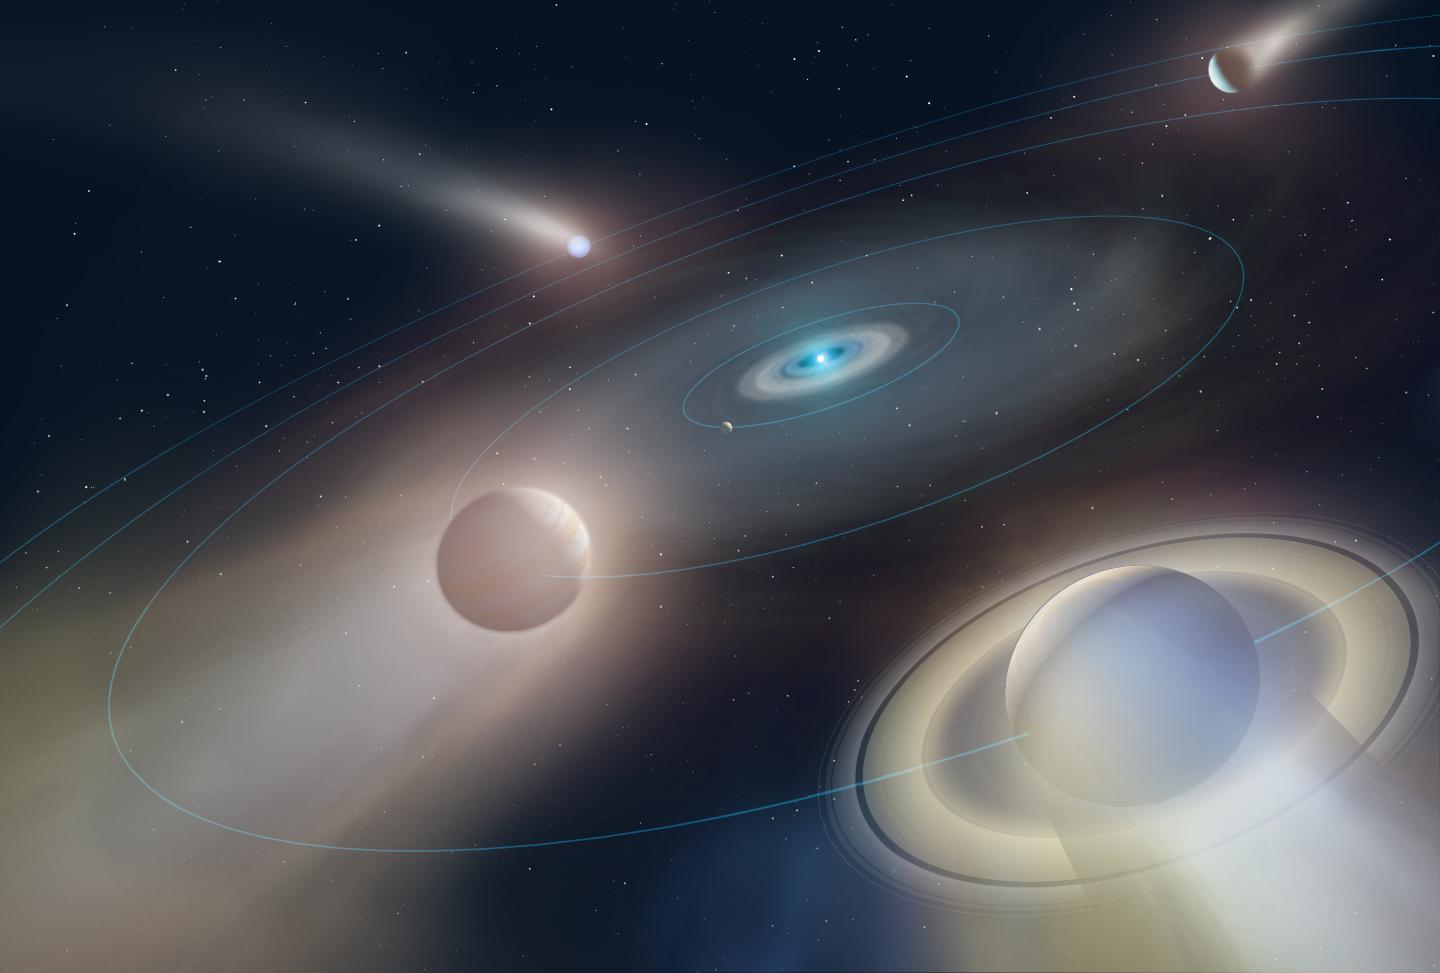 Artist's Impression of Future of the Solar System as Described in the Astrophysical Journal Letters 